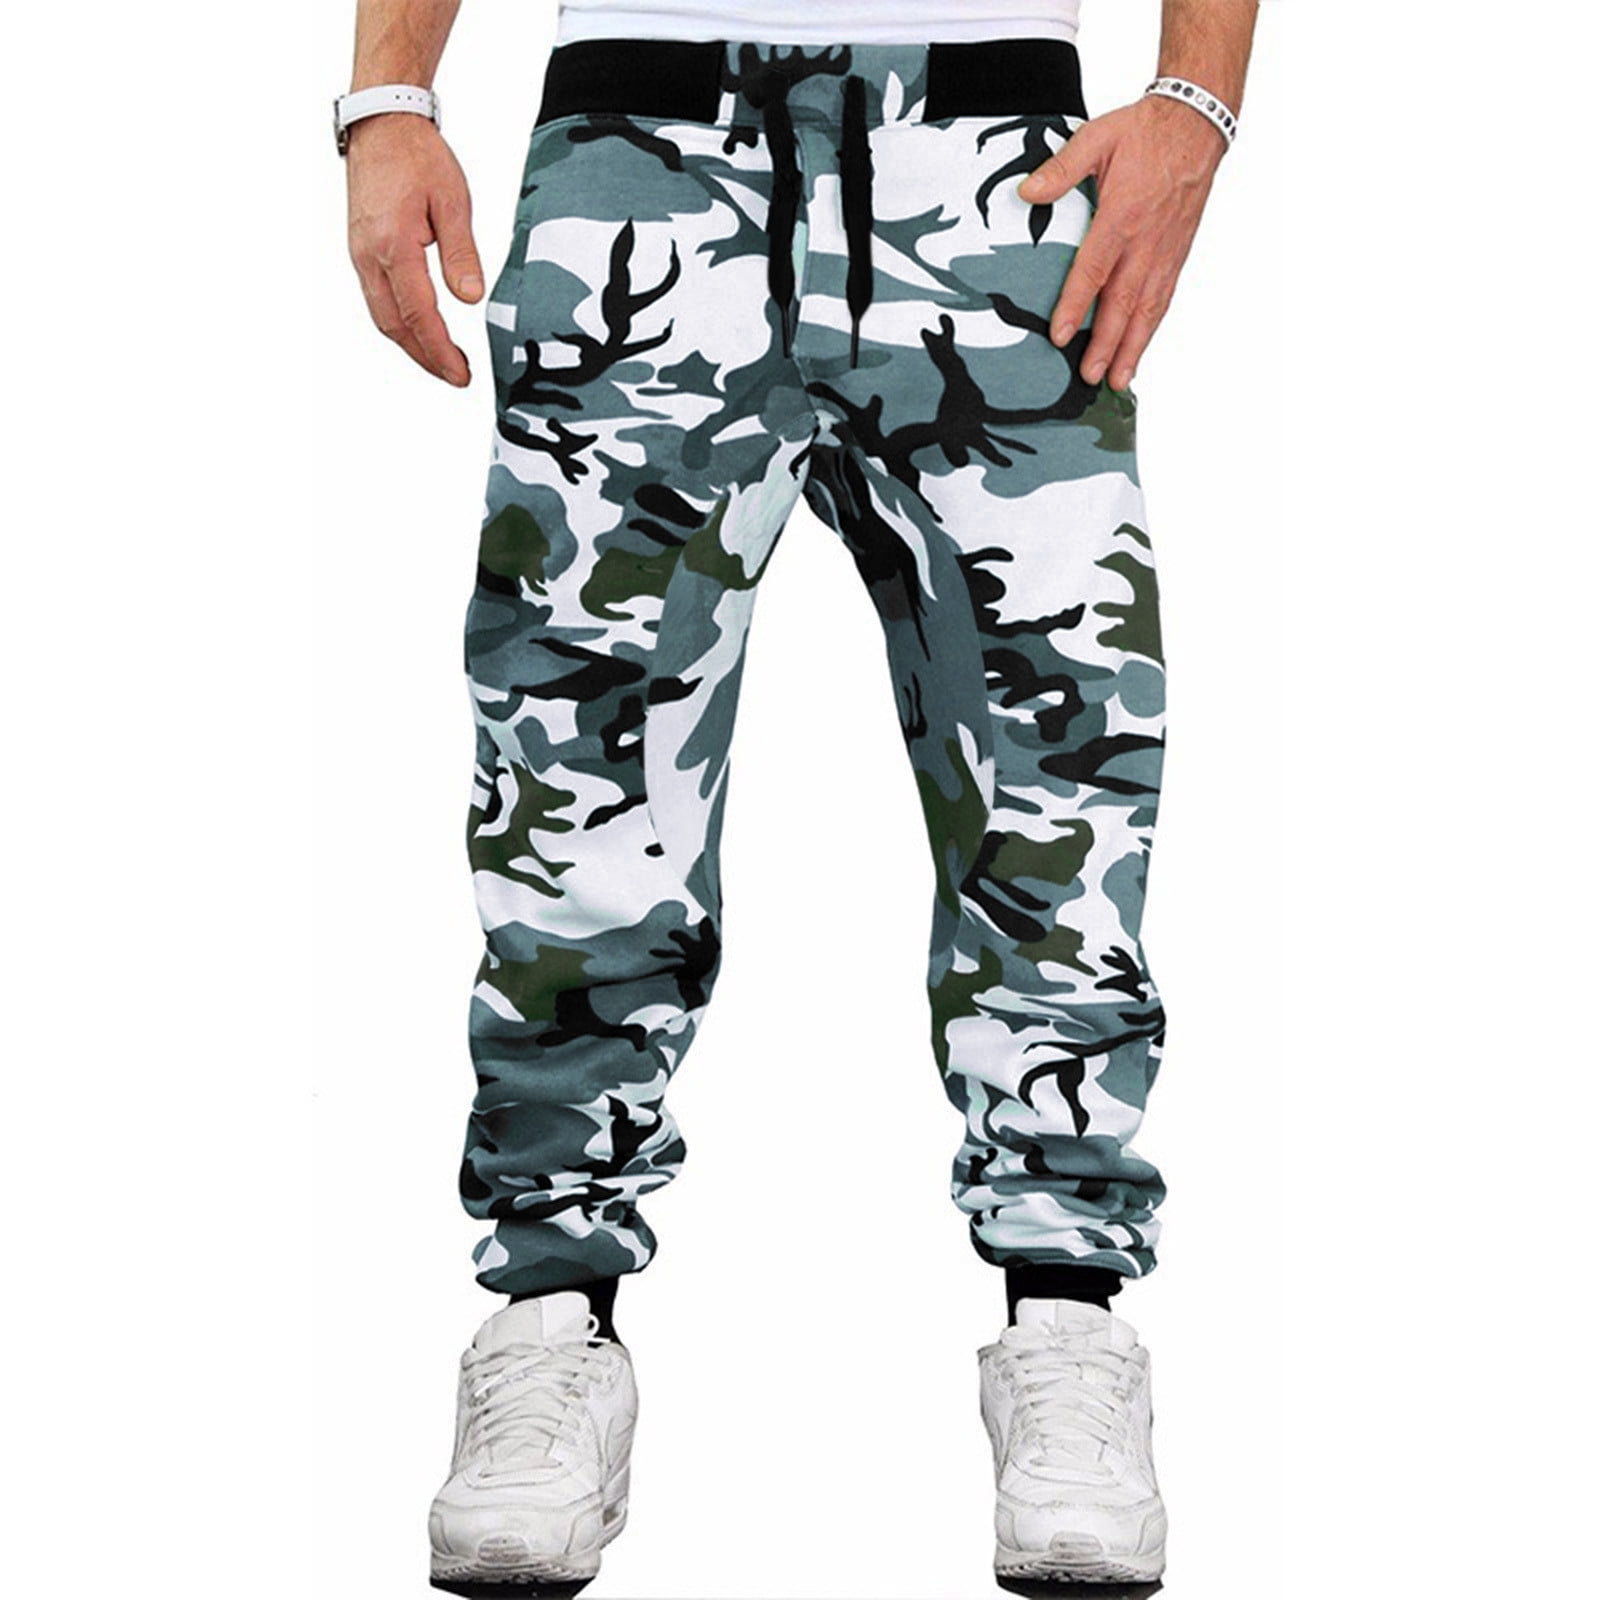 Labakihah cargo pants for men Male Camouflage Print Loose Casual ...